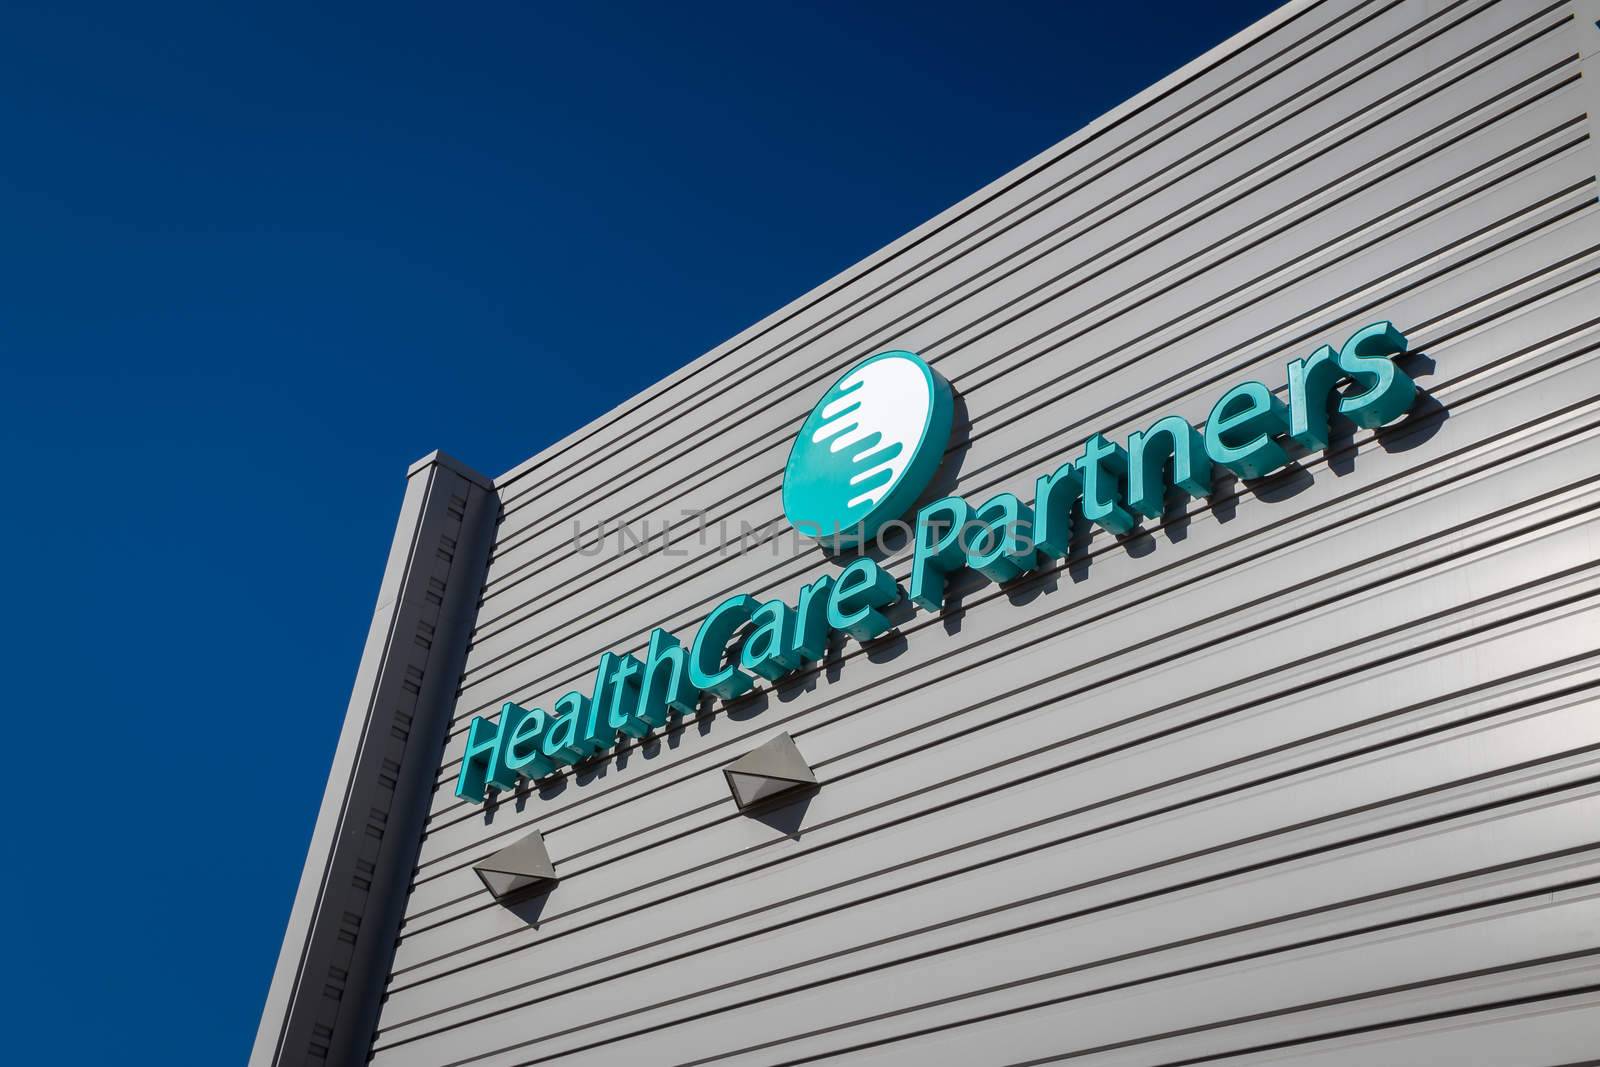 LOS ANGELES, CA/USA - NOVEMBER 22, 2015: HealthCare Partners exterior and logo. HealthCare Partners manages and operates medical groups and affiliated physician networks.